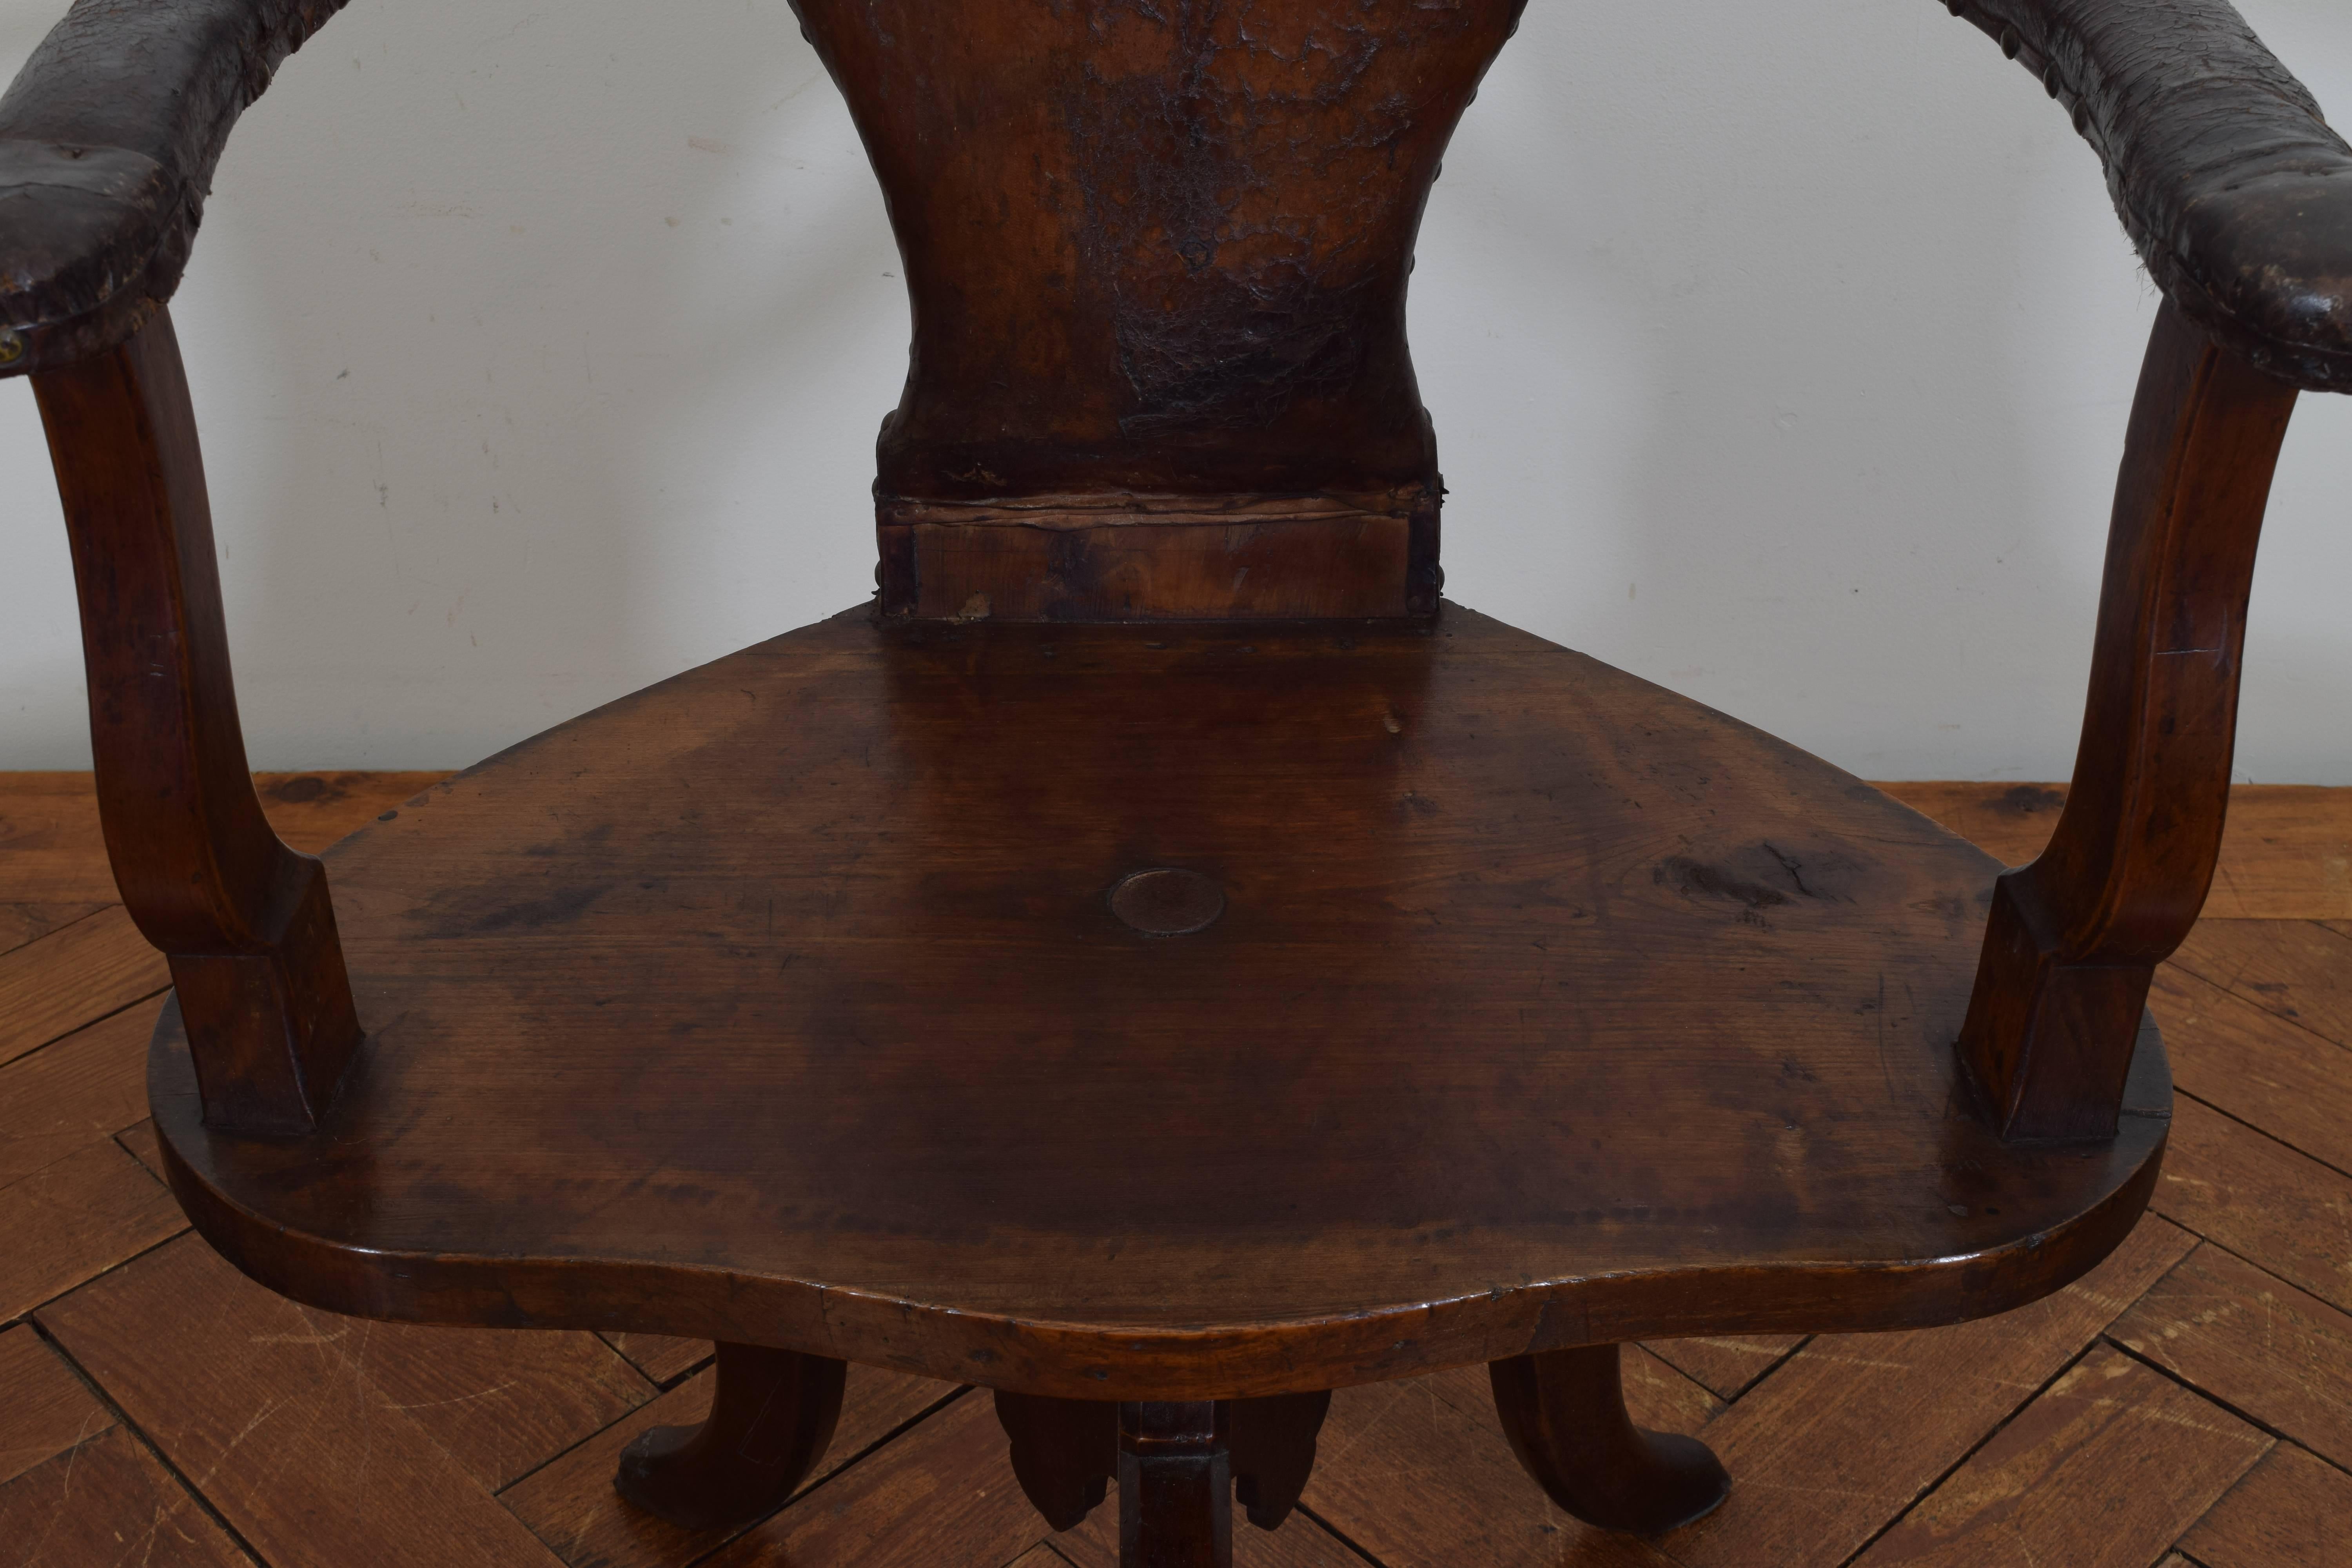 Italian Baroque Walnut and Leather Upholstered Swivel Chair, Early 17th Century 3